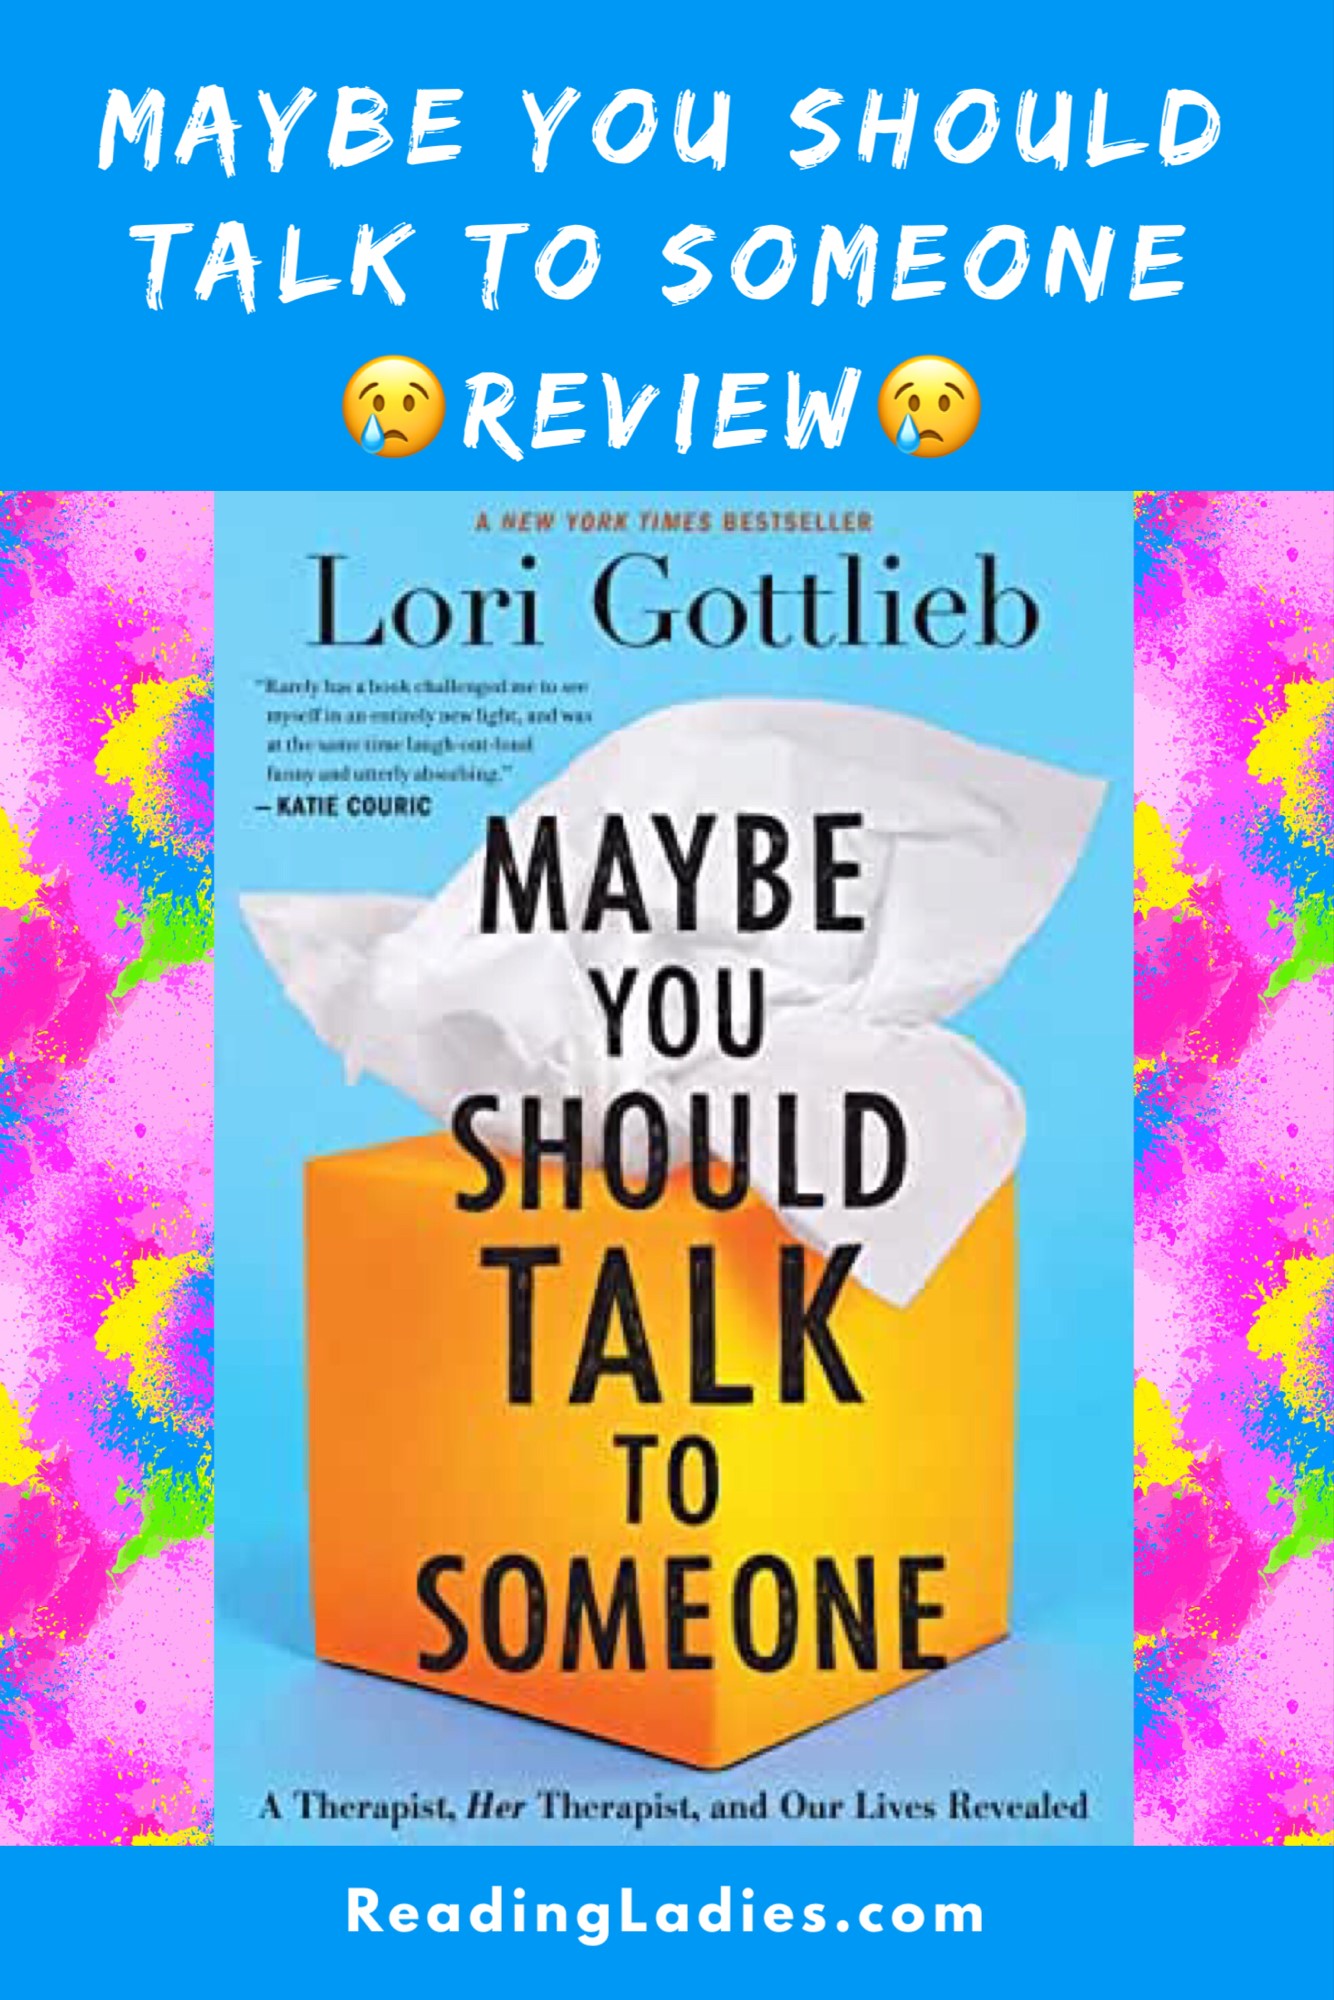 Maybe You Should Talk to Someone by Lori Gottlieb (cover) Image: black text over a large yellow box of tissue against a blue background